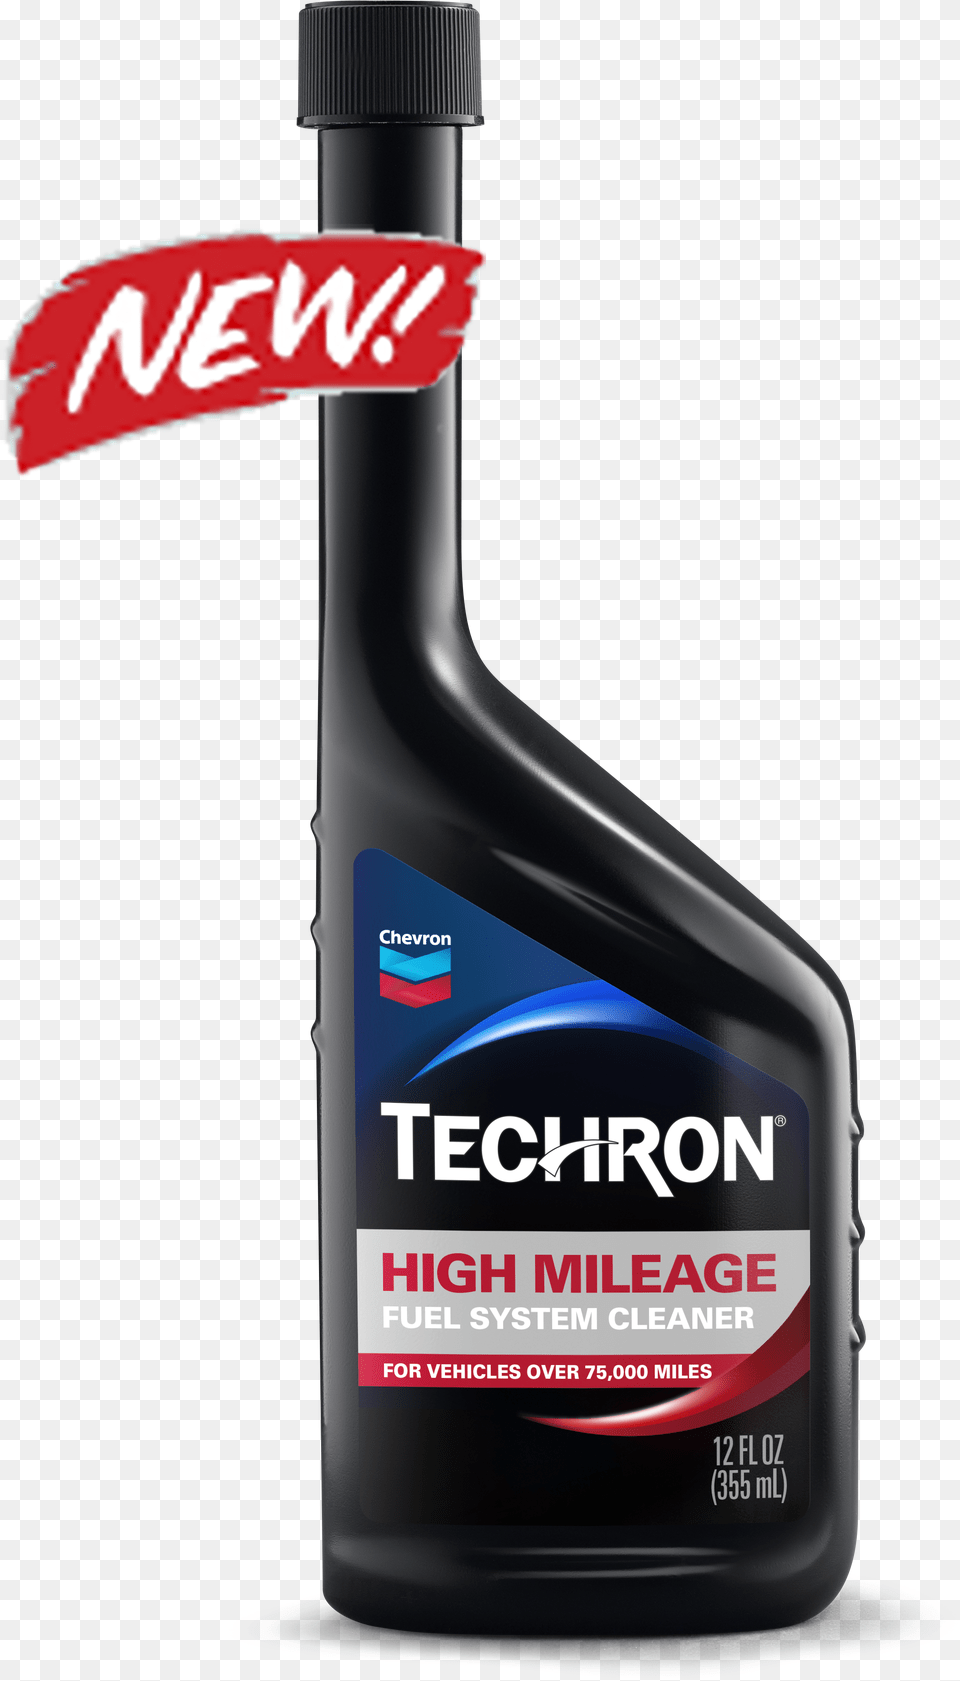 Chevron Techron Fuel System Cleaner Png